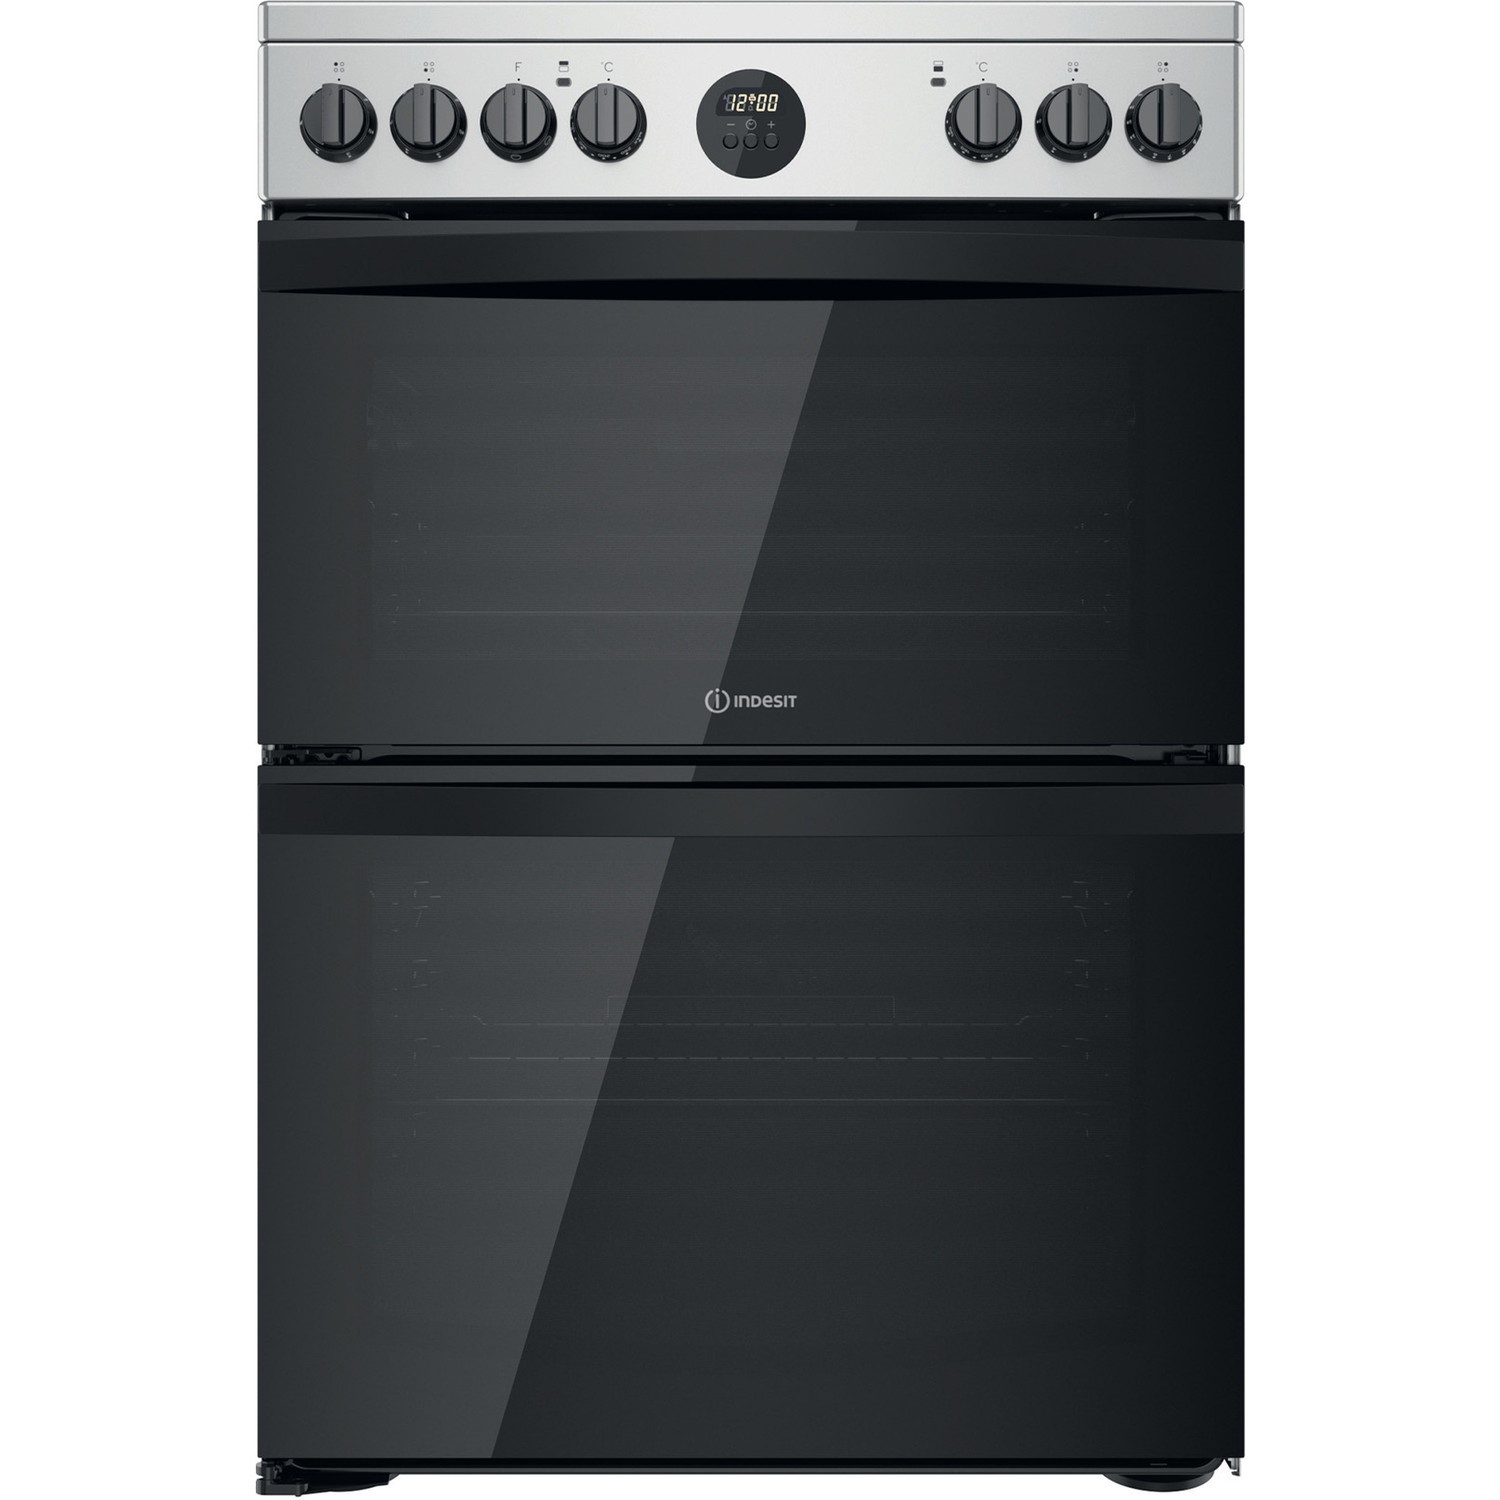 Indesit 60cm Double Oven Electric Cooker - Stainless Steel